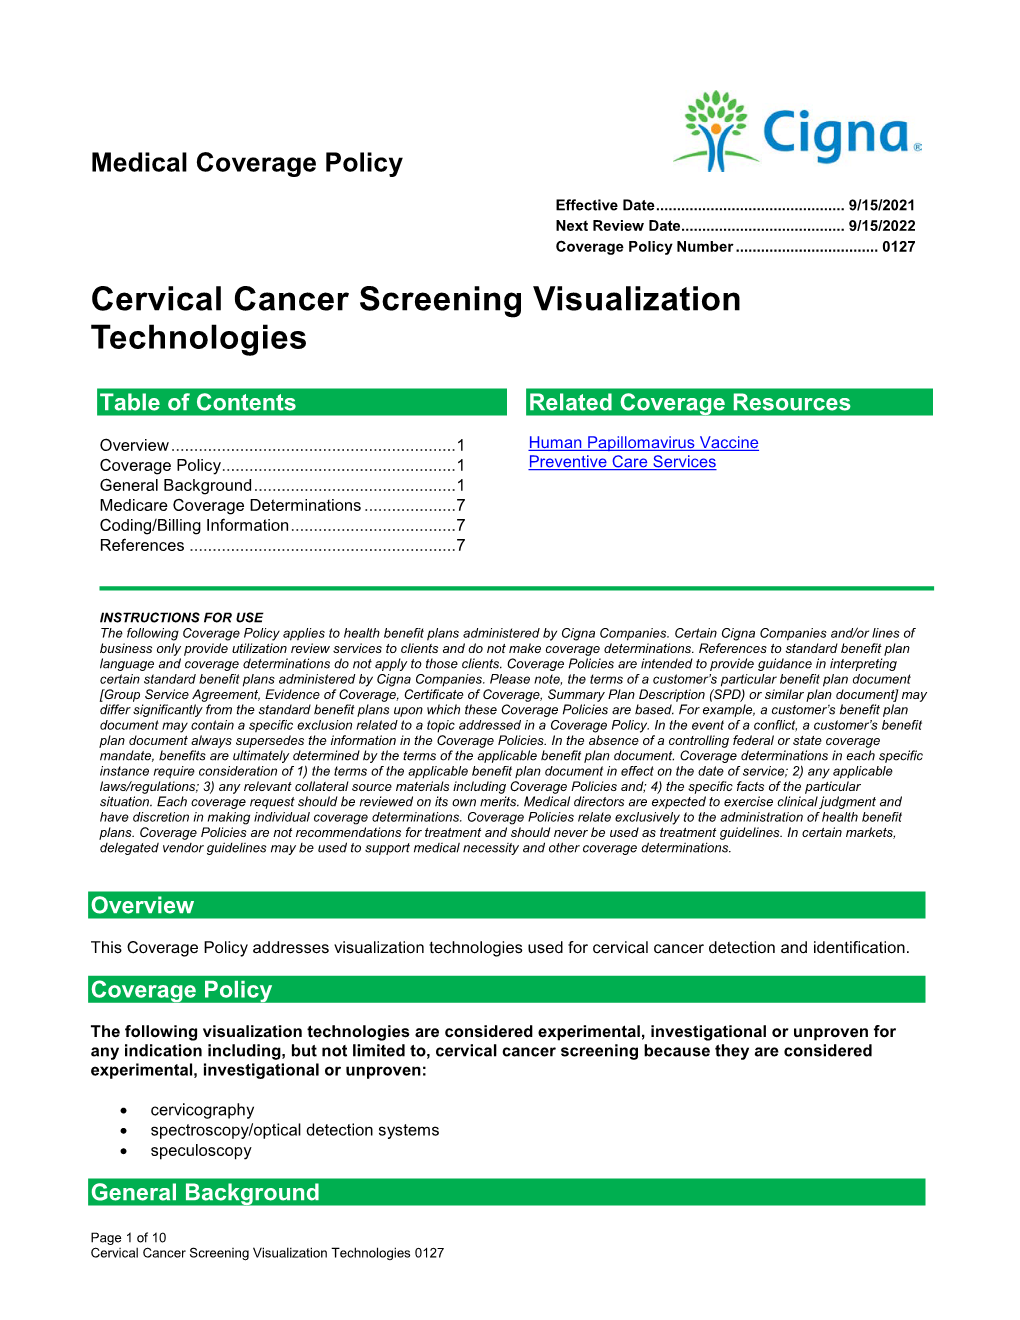 Cervical Cancer Screening Visualization Technologies